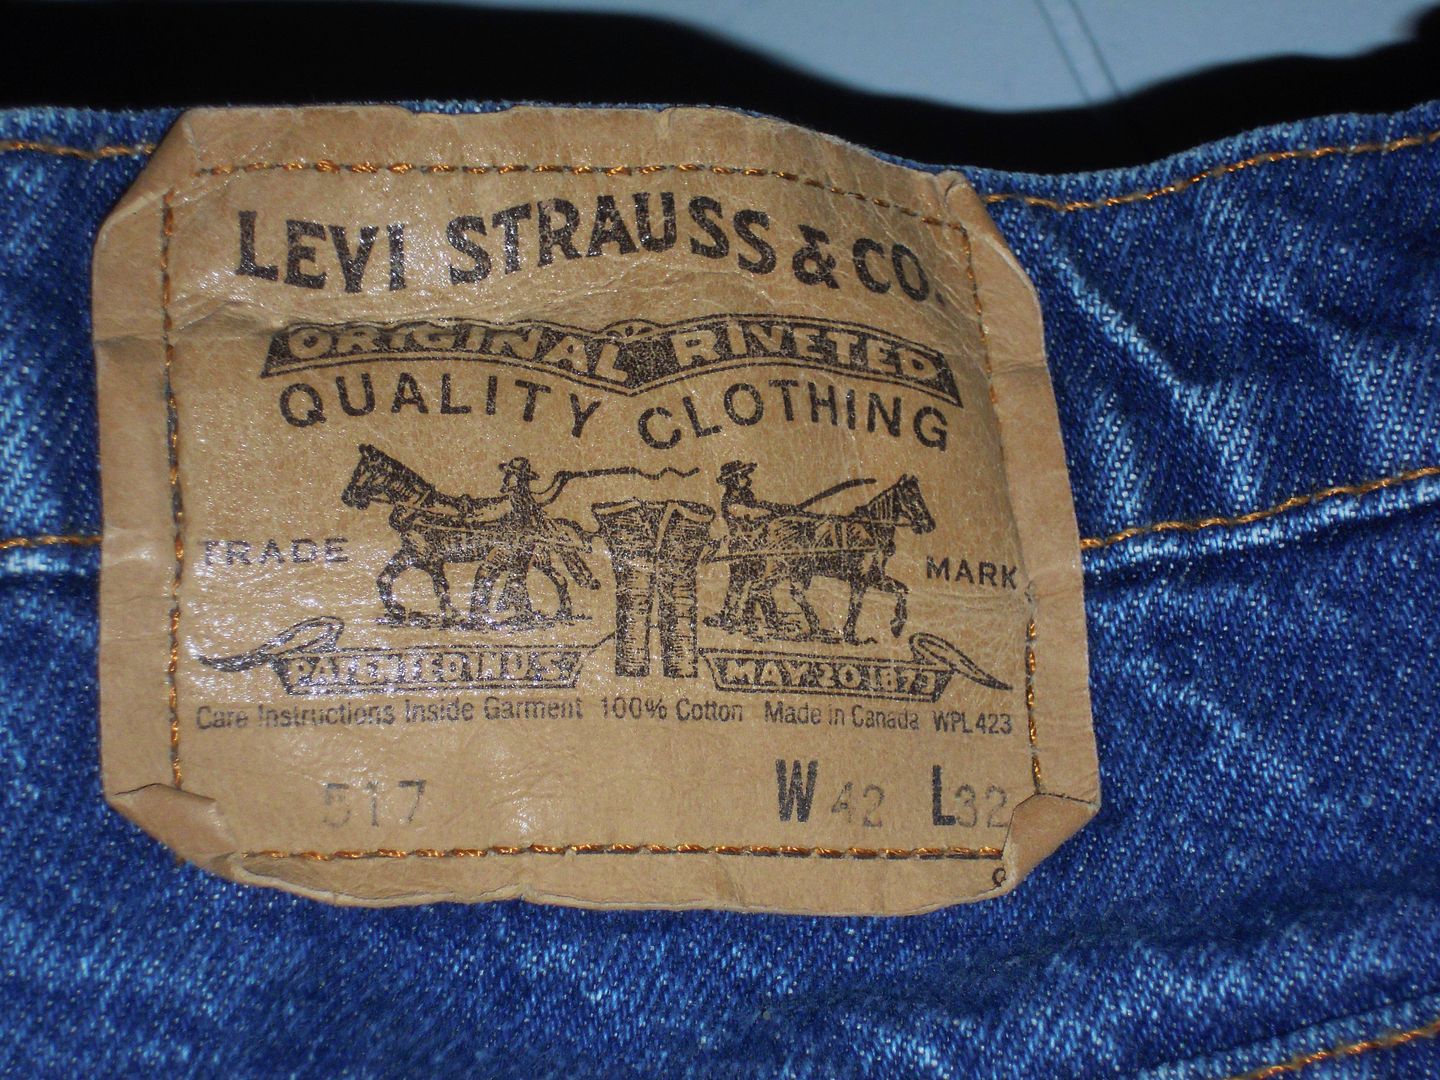 Levi Strauss Co Heavy 517 Boot Cut Med Denim Jeans W42 L 32 Canadian Made